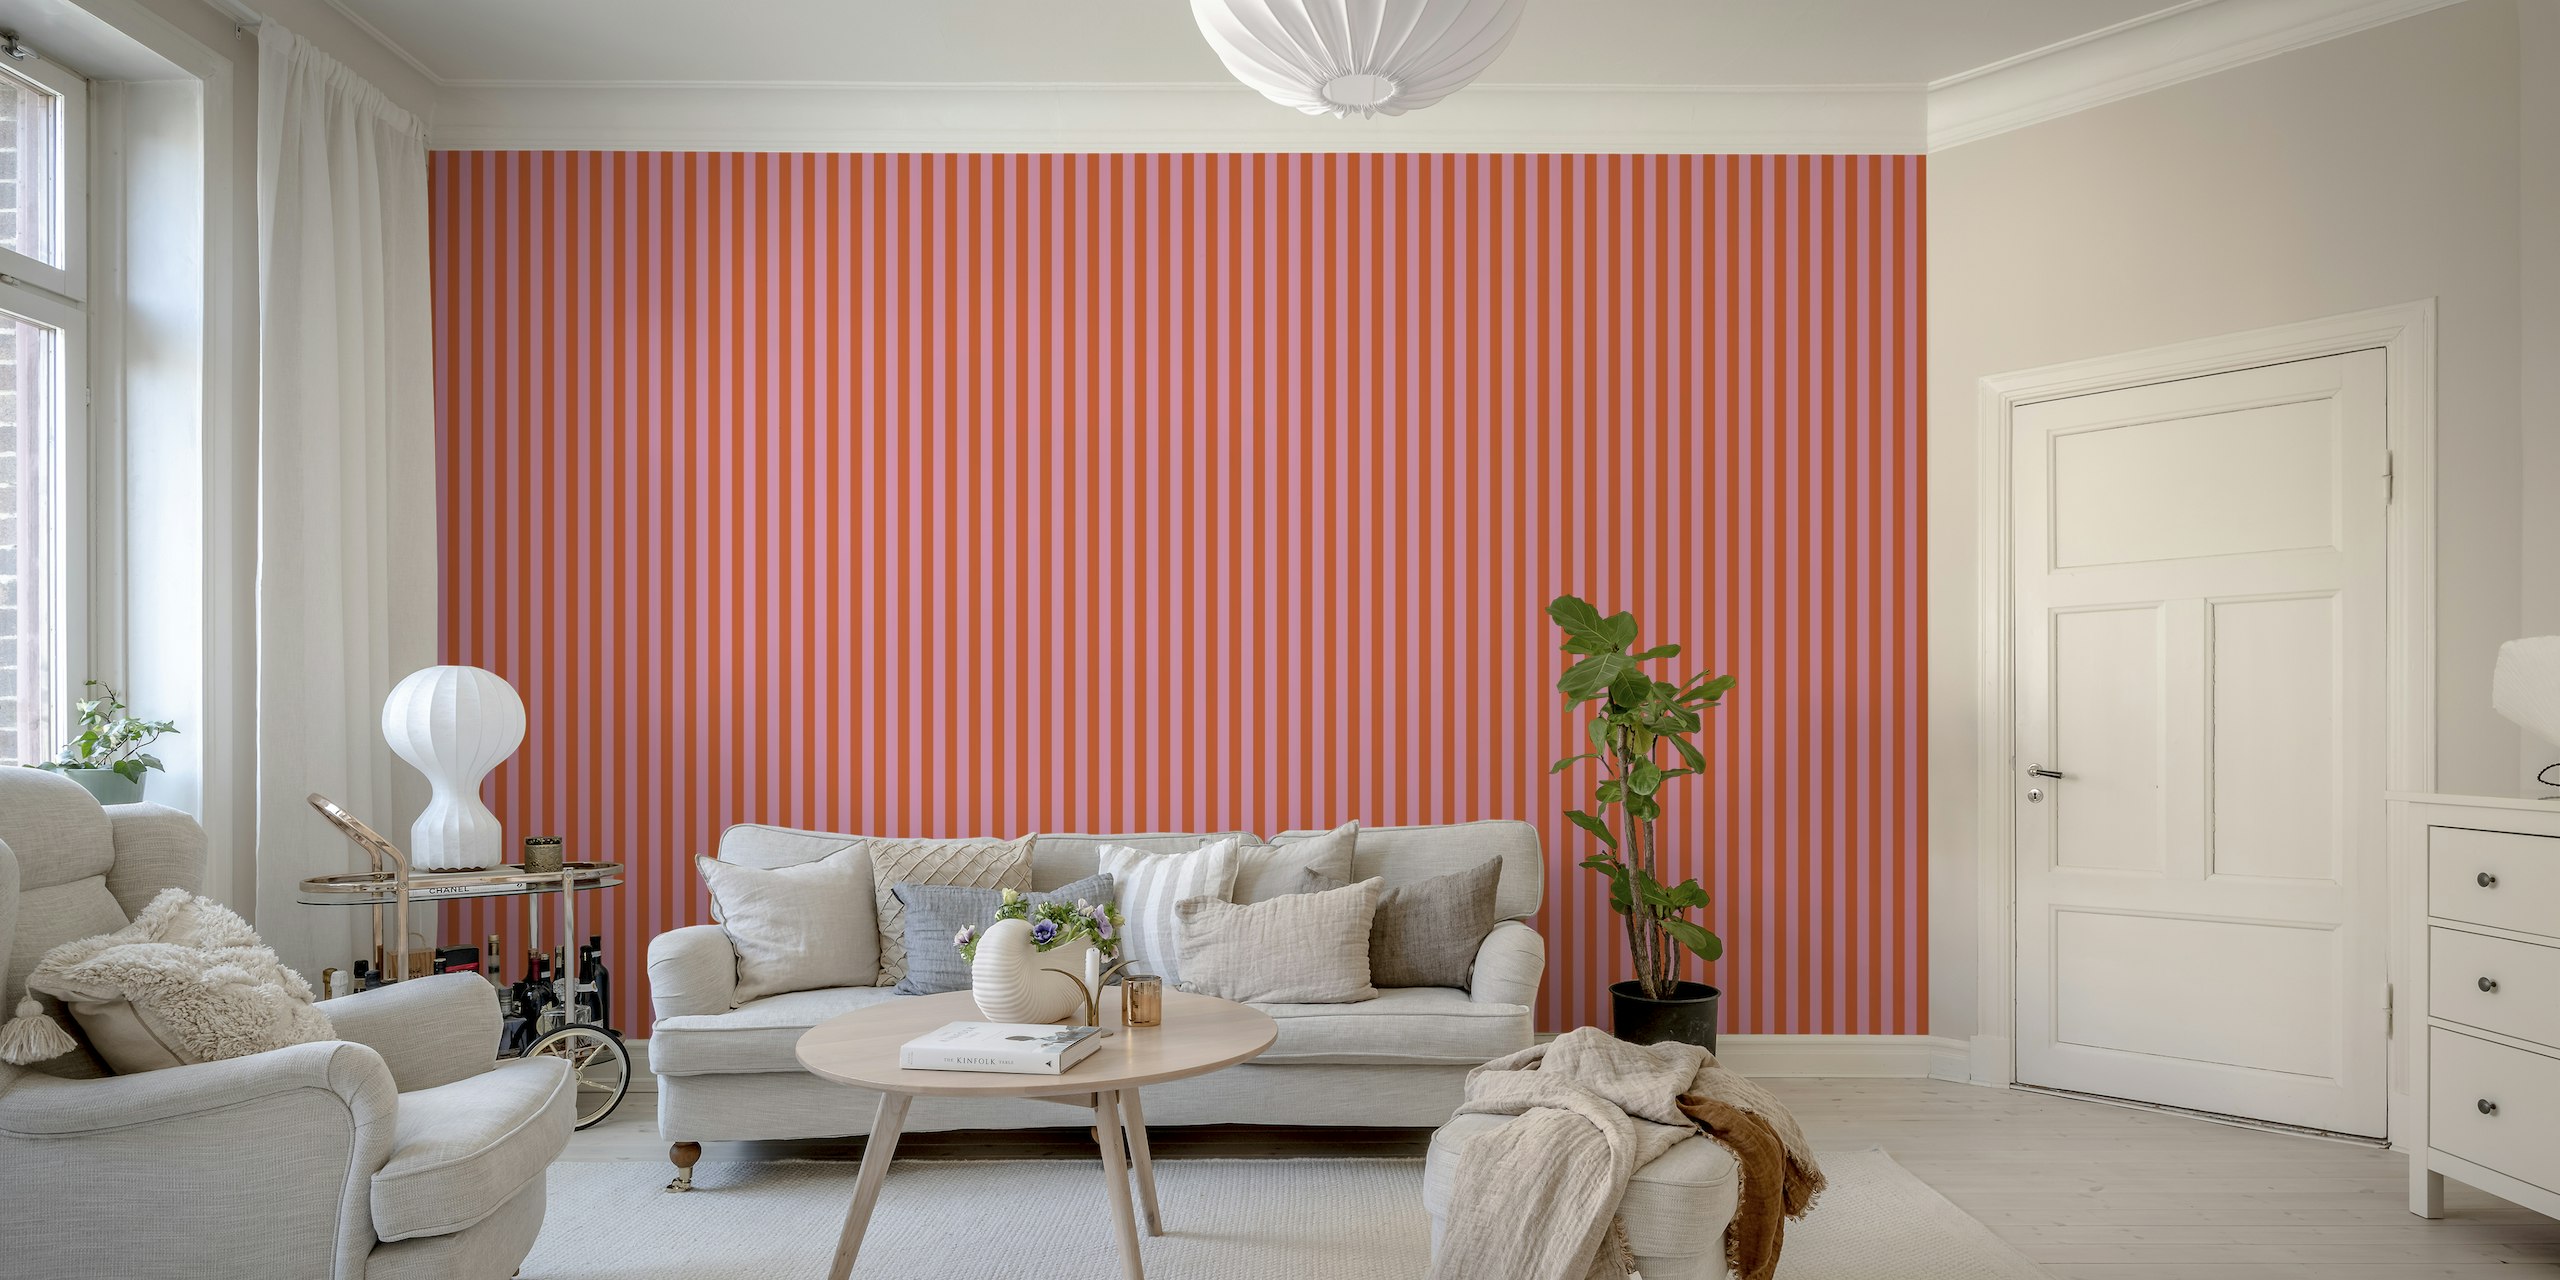 Pink and red awning stripe wallpaper